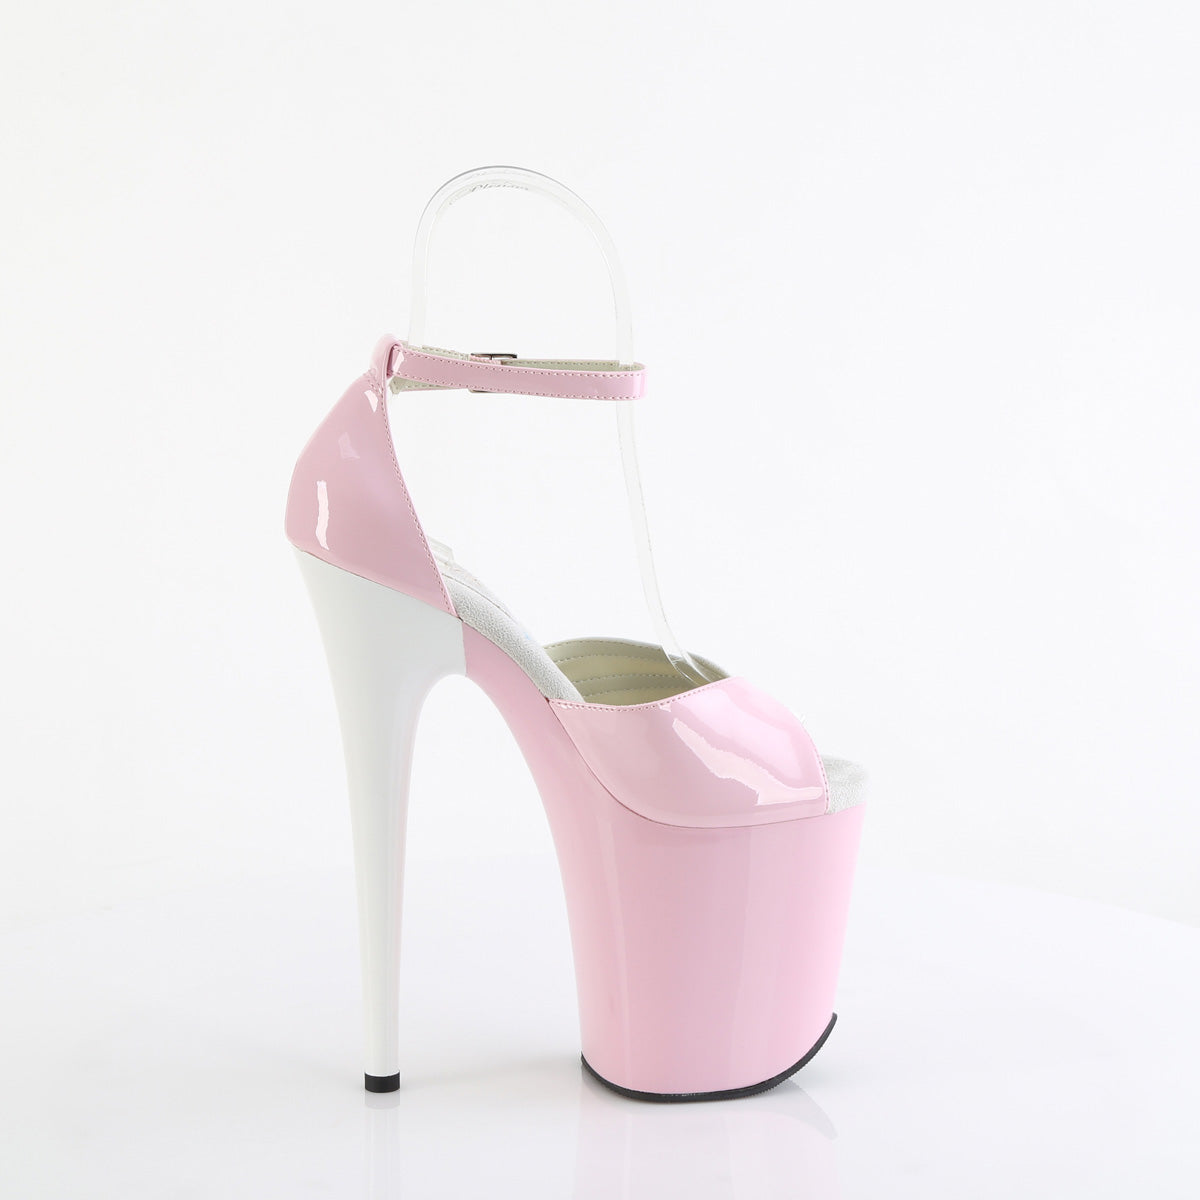 FLAMINGO-884 Pleaser Sexy 8 Inch Pink Pole Dancing Shoes